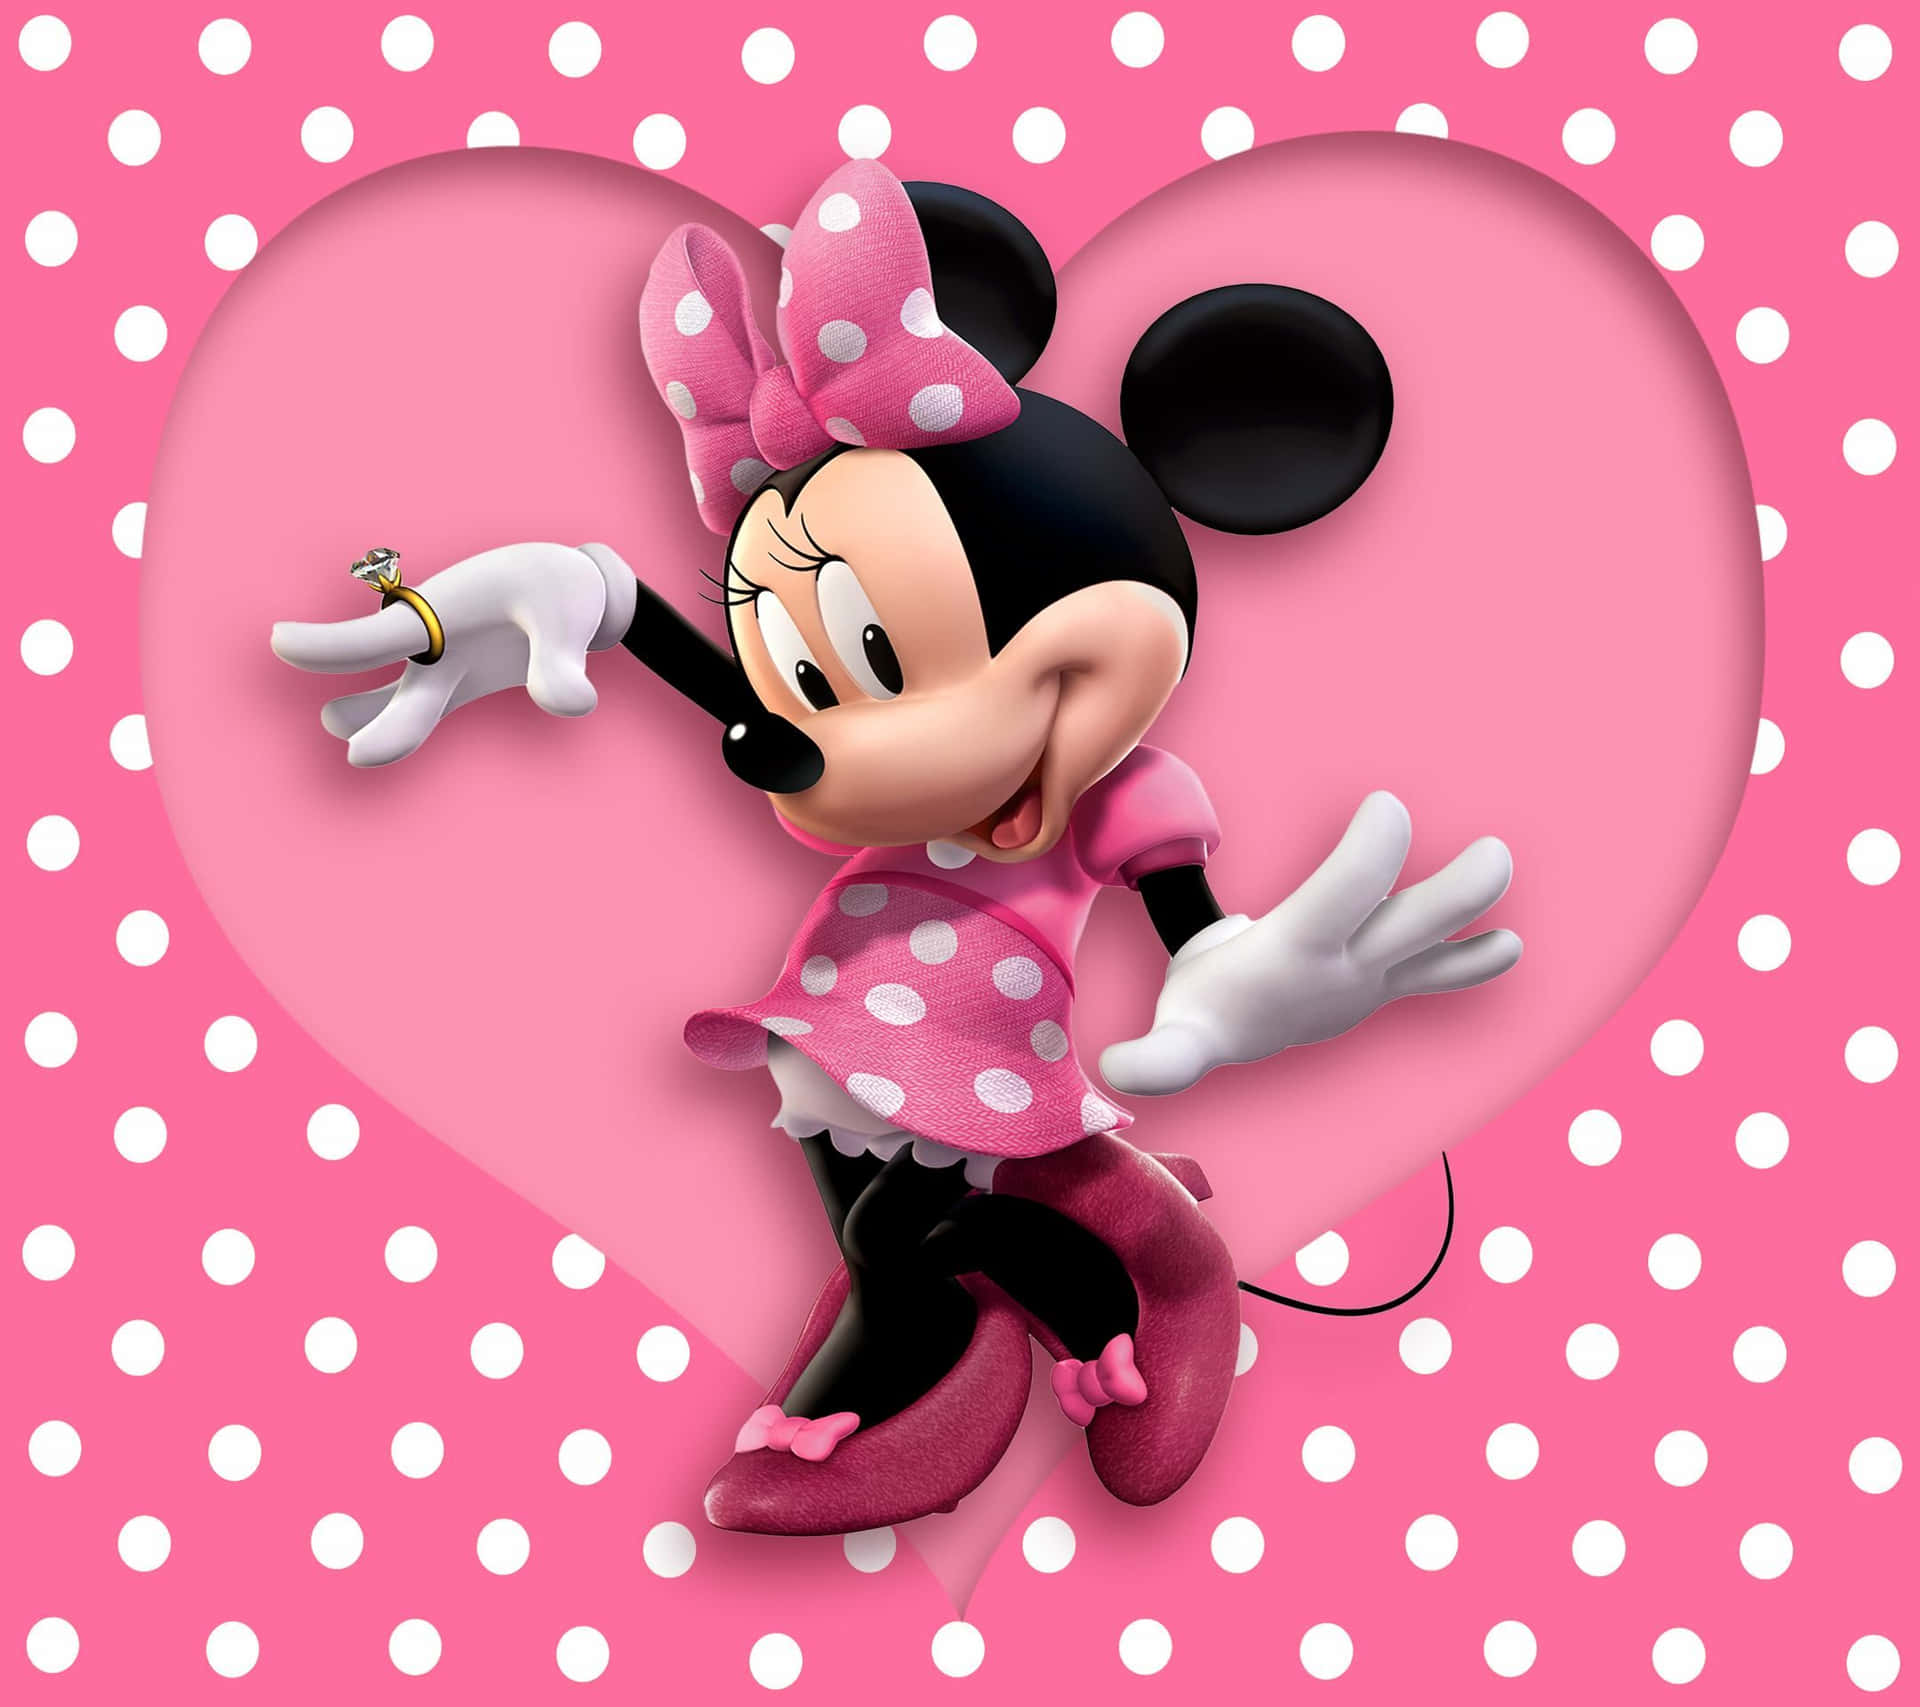 Minnie Mouse looking cute in pink Wallpaper